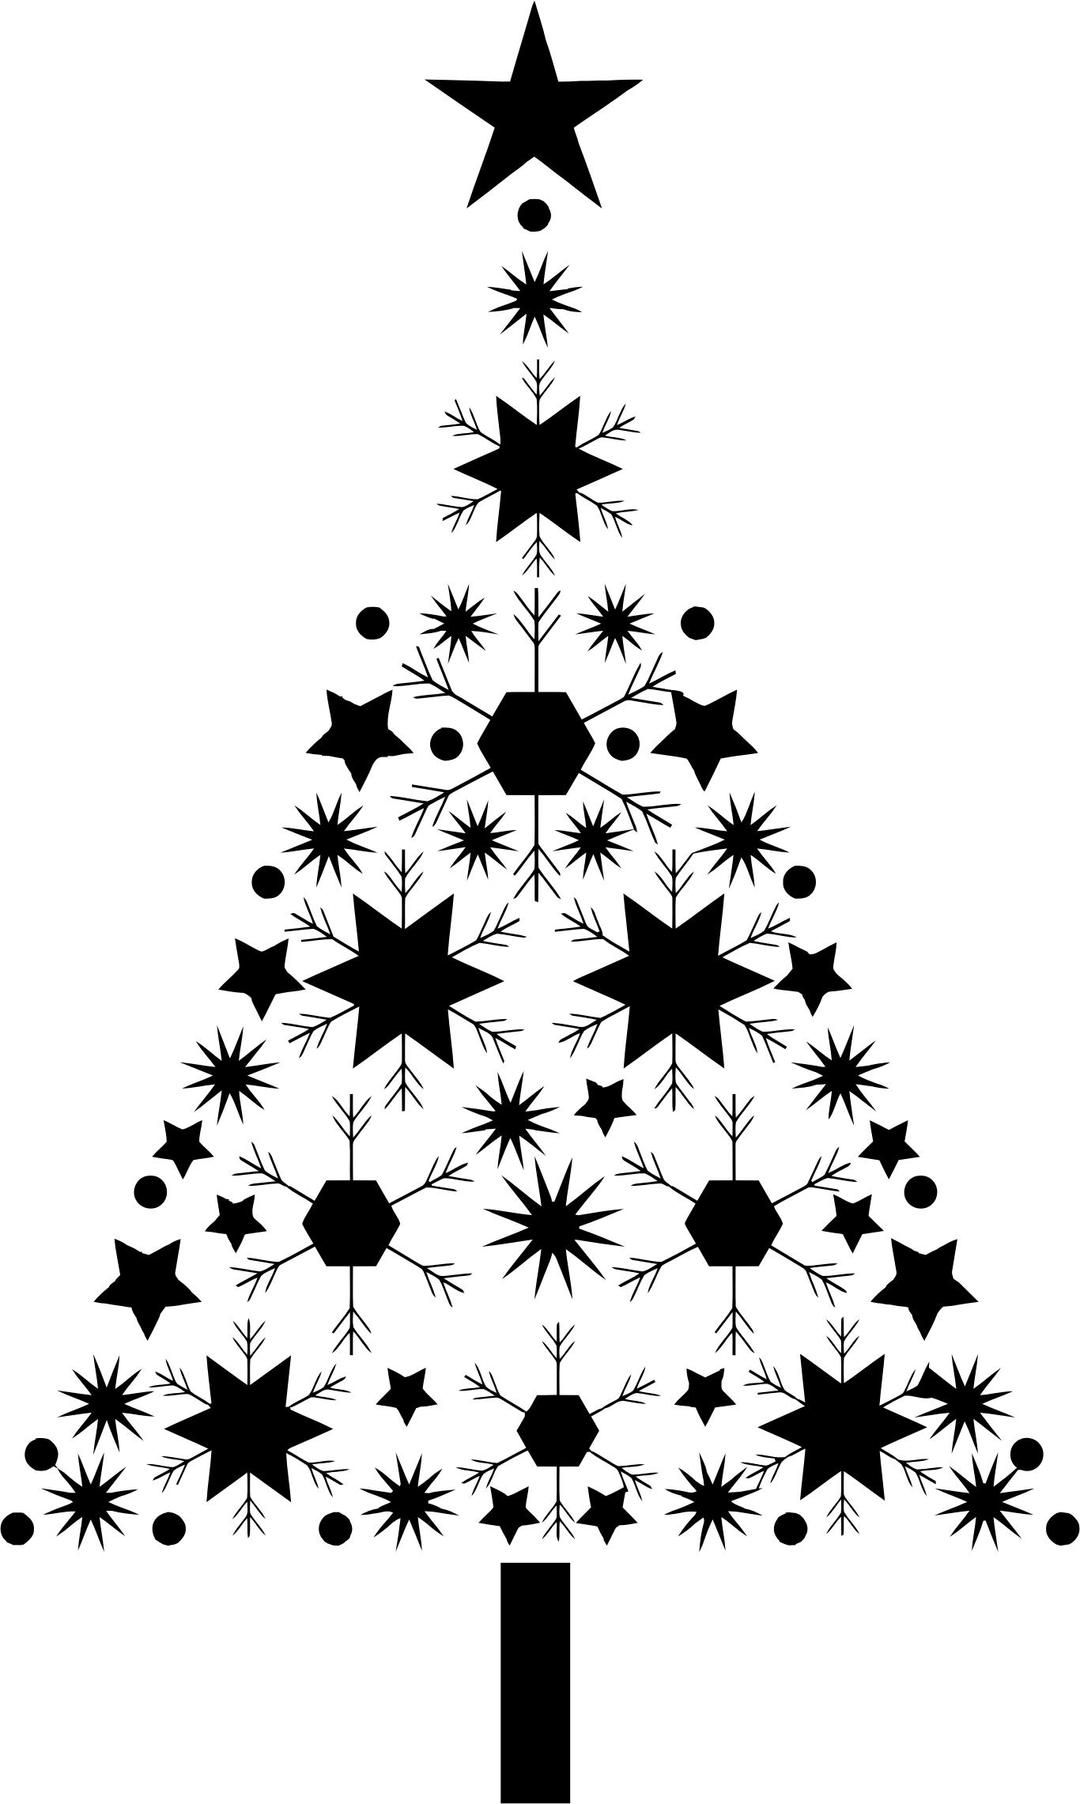 Abstract Snowflake Christmas Tree By Karen Arnold png transparent